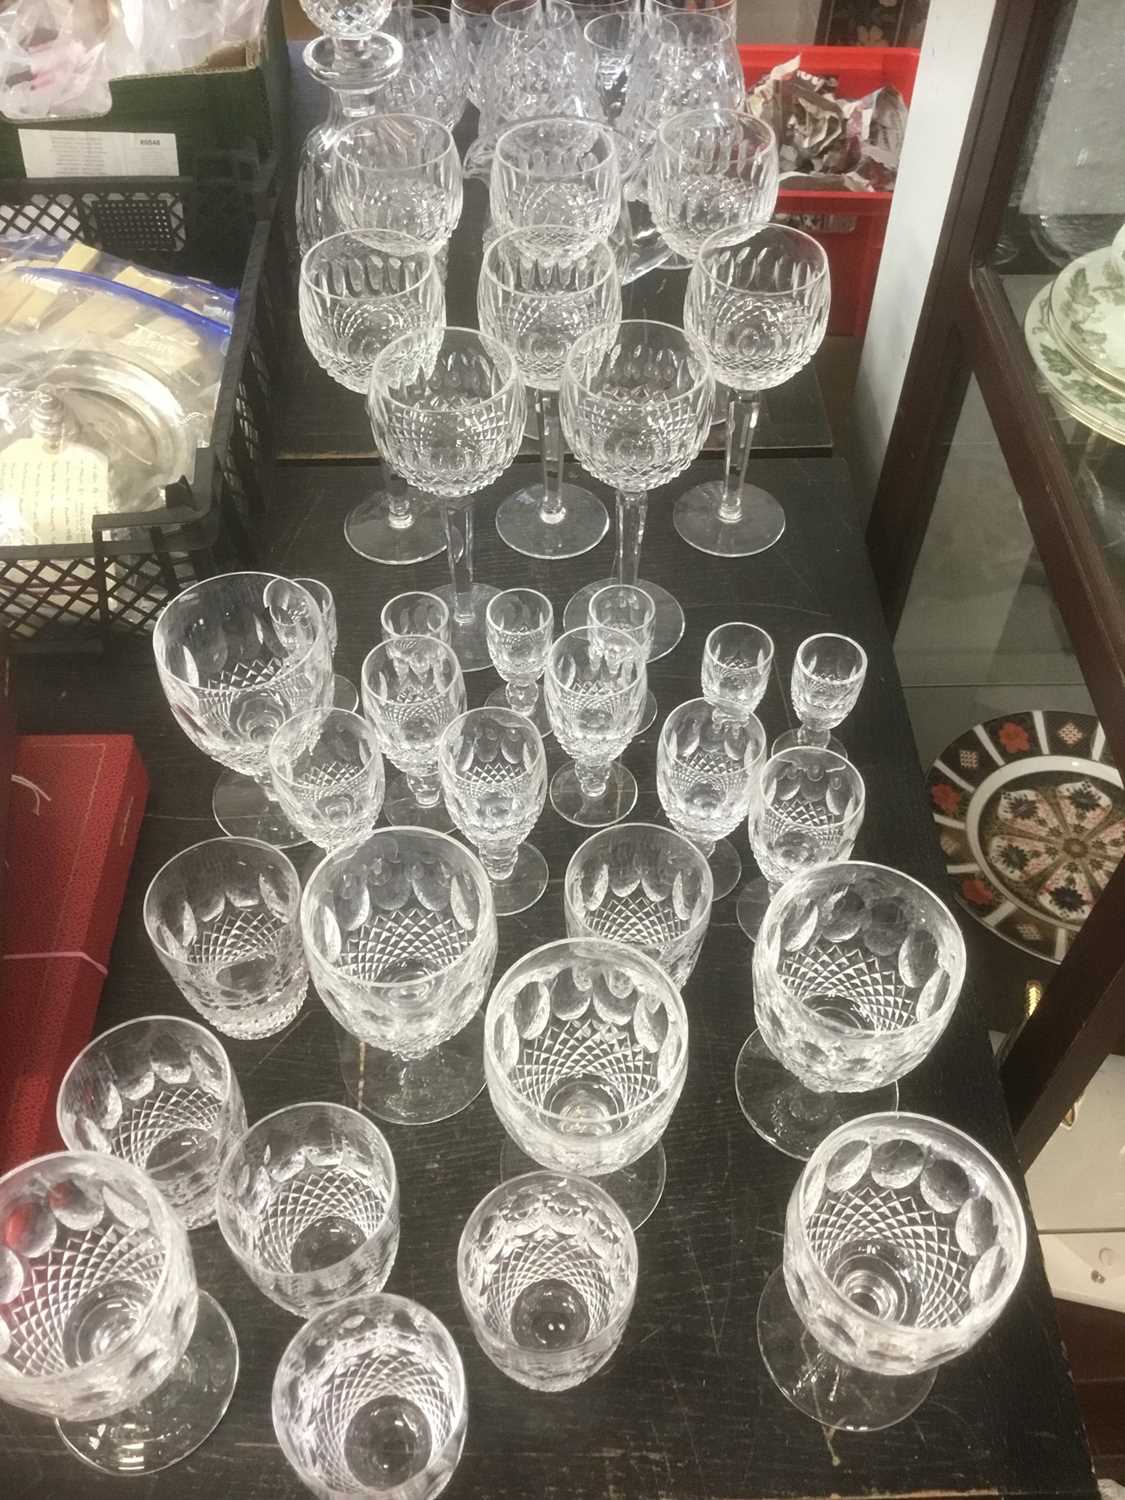 Extensive collection of Waterford Colleen pattern glassware